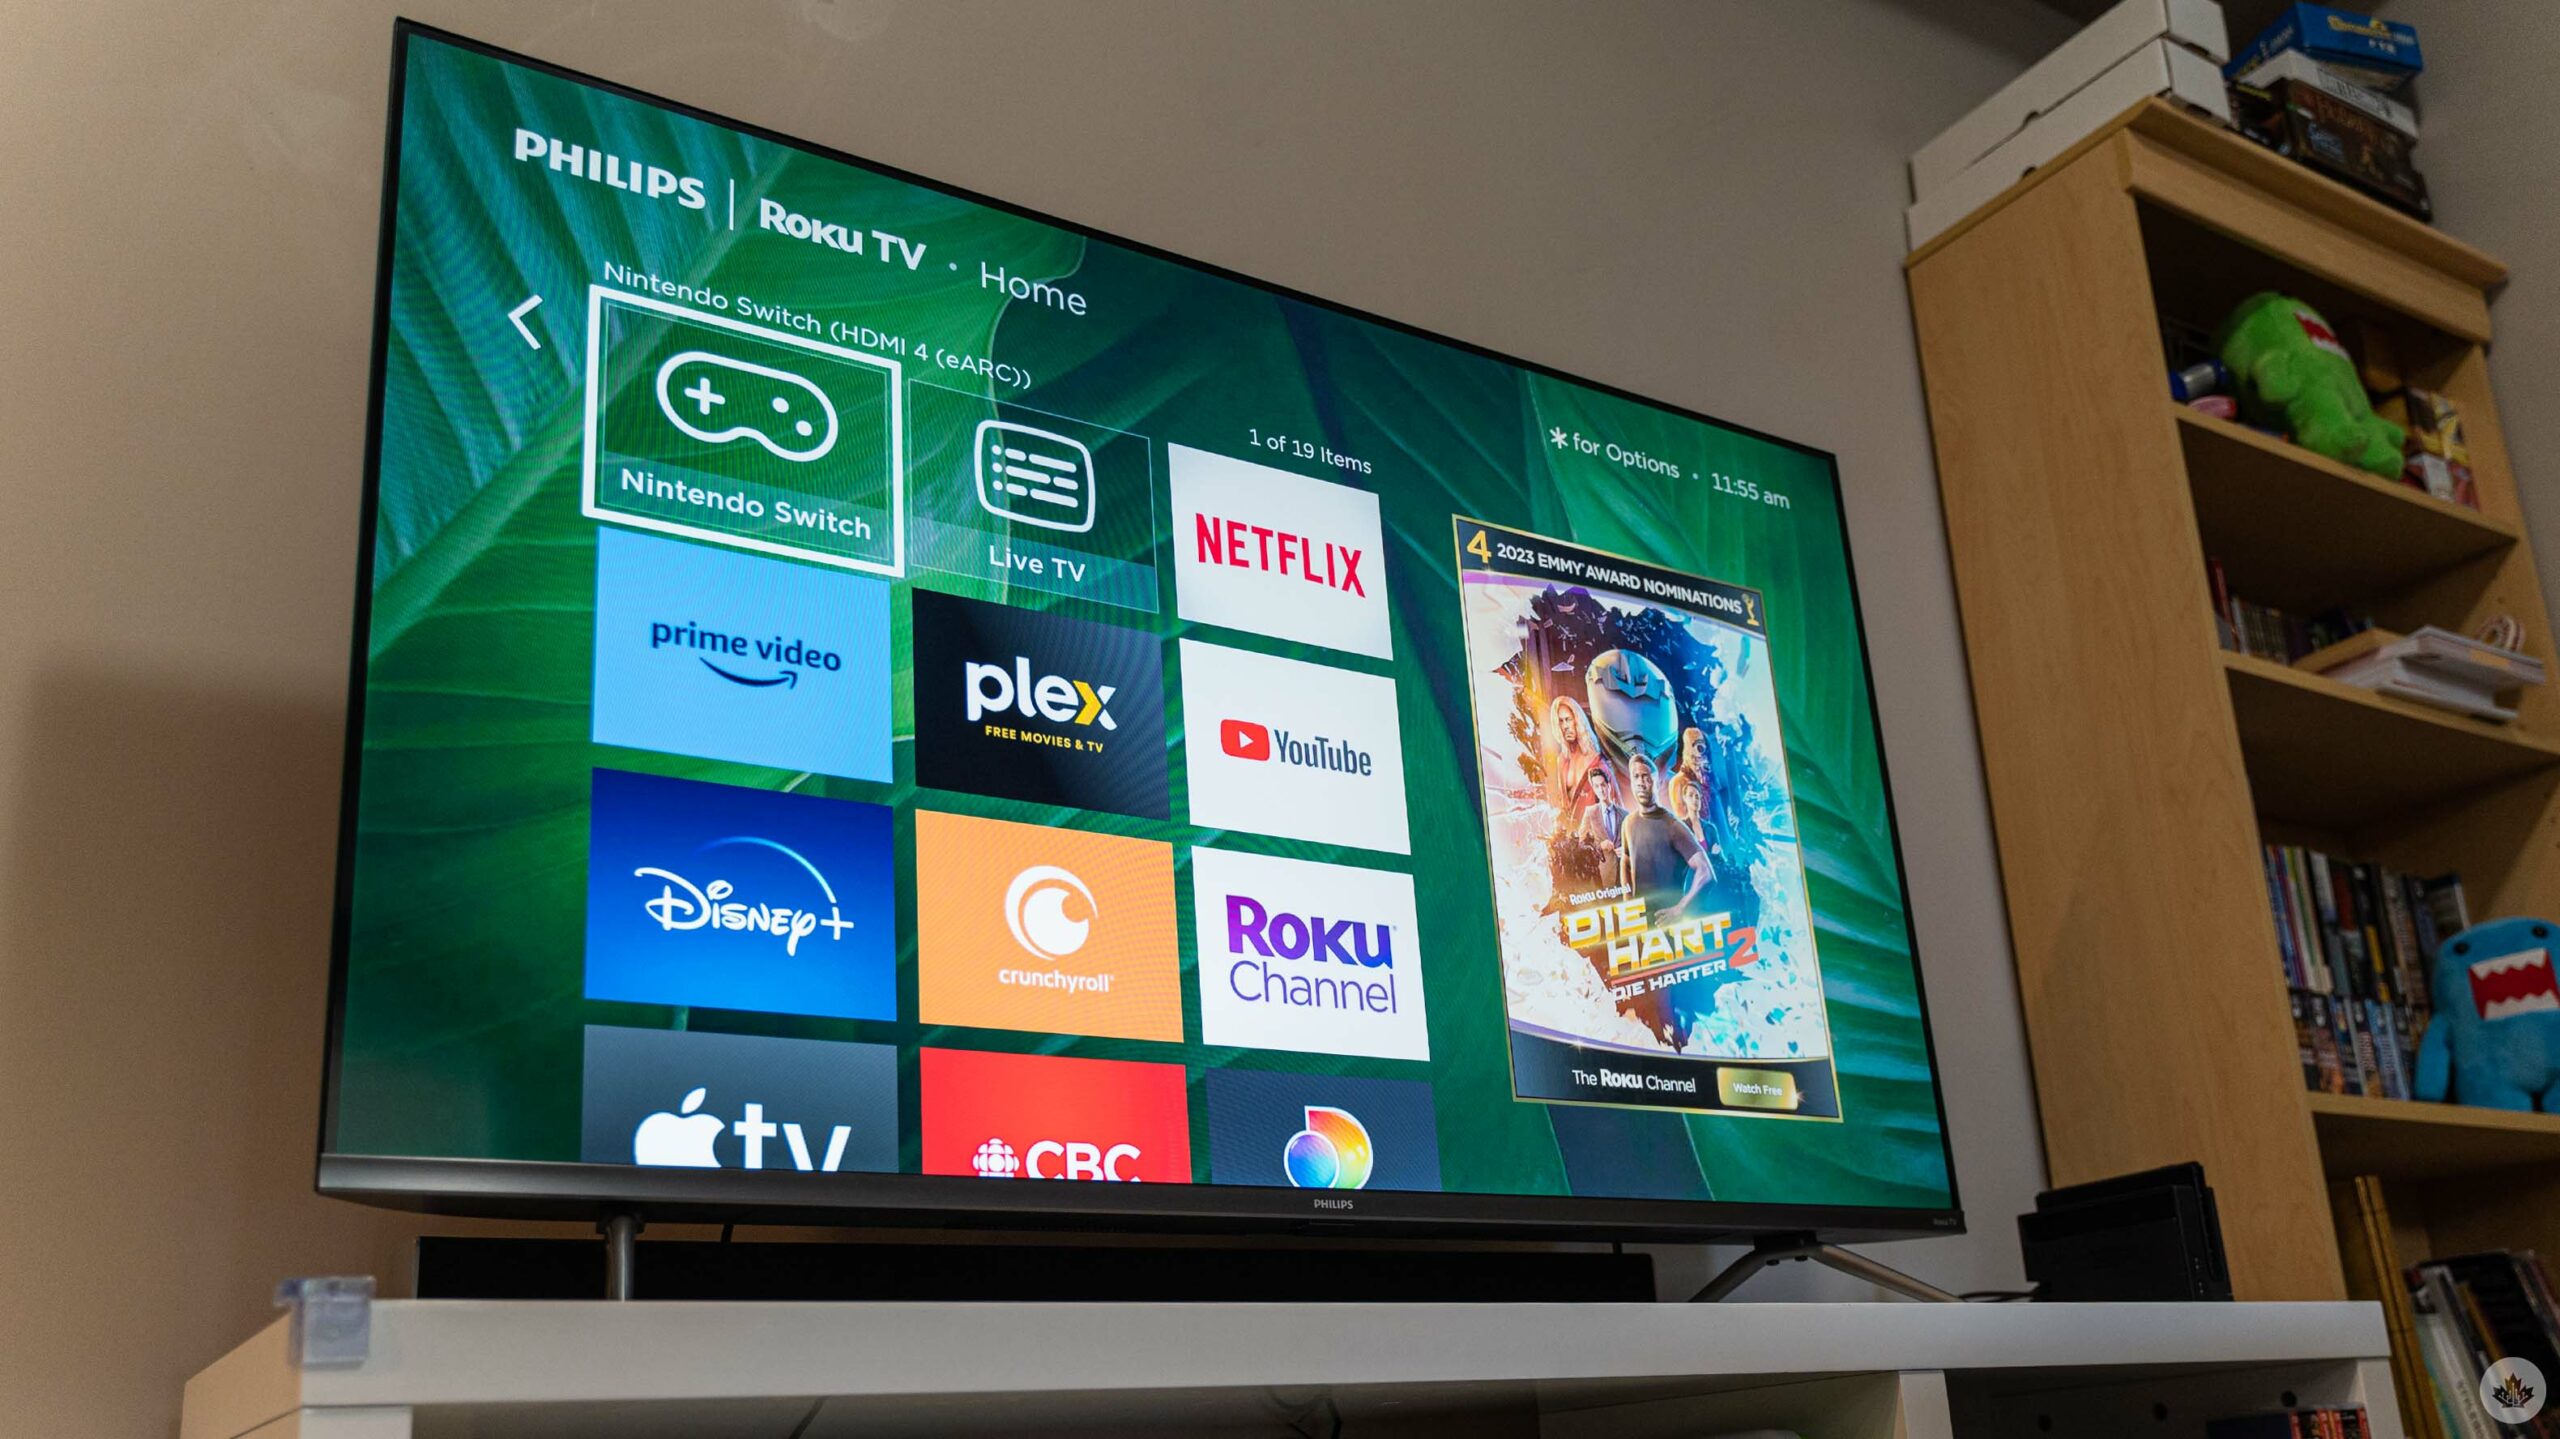 Roku Plans to Increase Advertisements on Its Home Screen 26